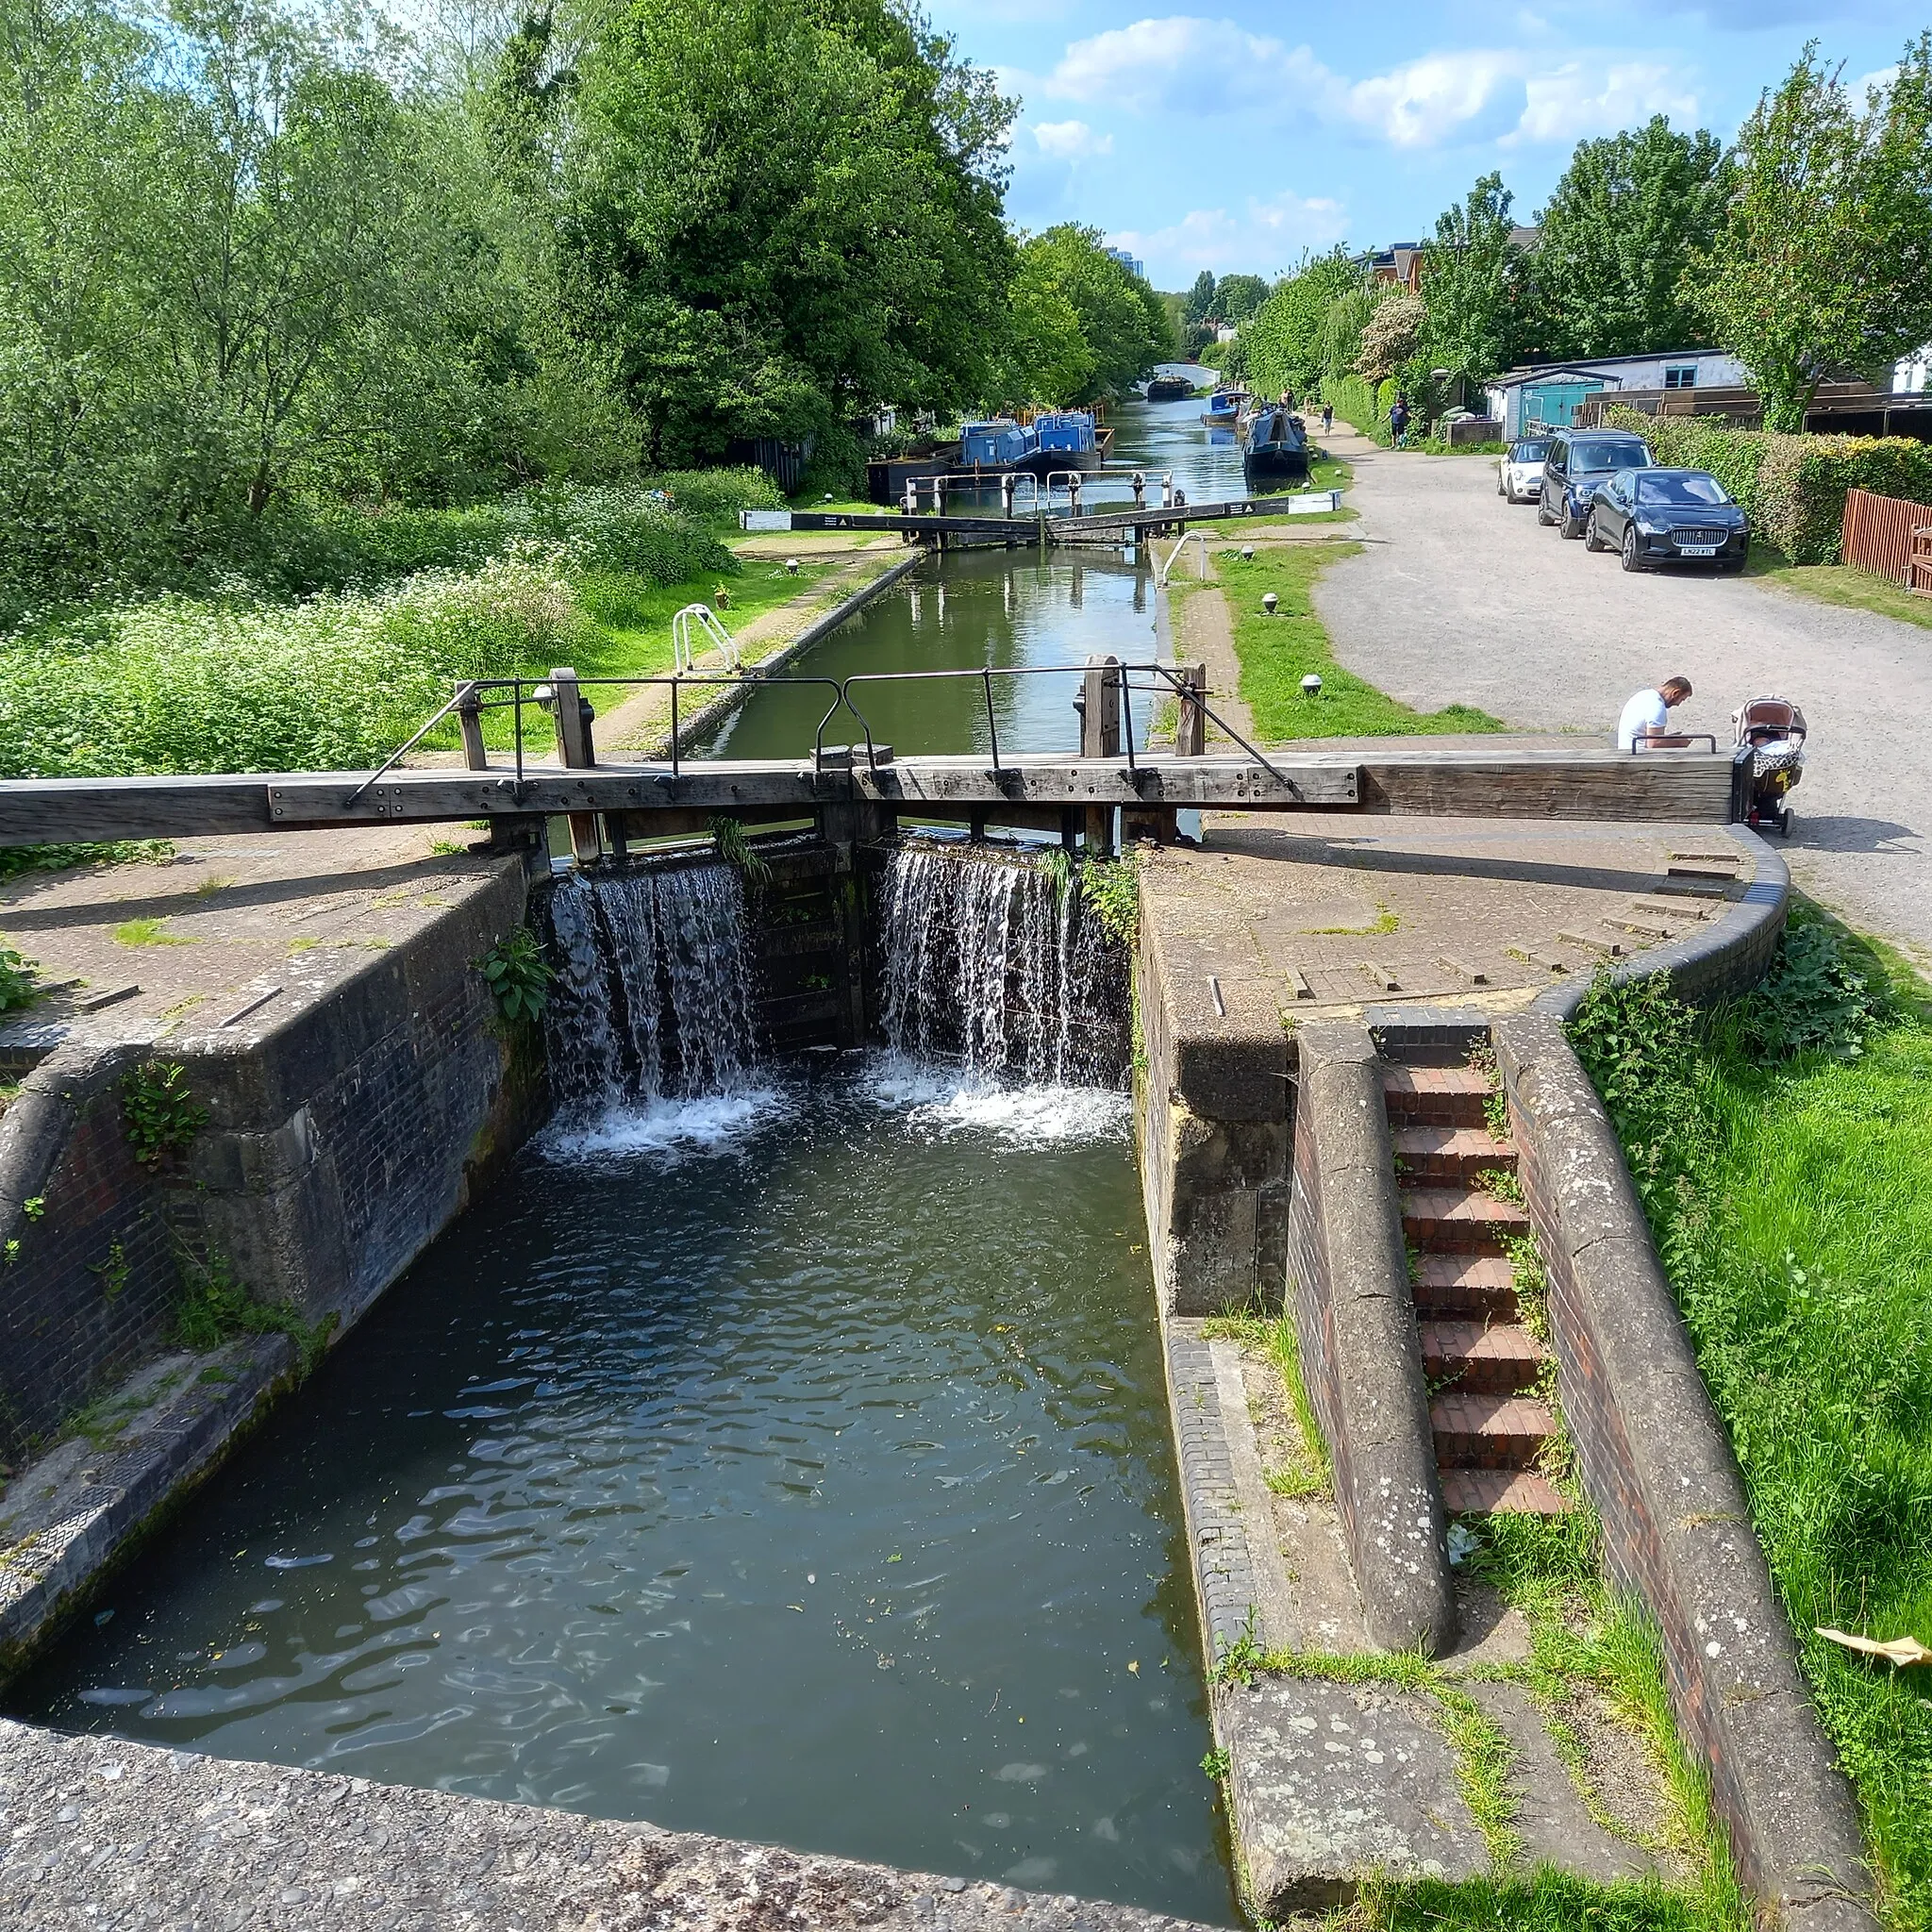 Photo showing: Apsley Middle Lock (Lock 66) on the Grand Union Canal in Apsley, Hertfordshire, looking north towards Apsley Top Lock (Lock 65) and beyond that, Hemel Hempstead. Taken from the footbridge by the Apsley Mills Sainsbury supermarket.